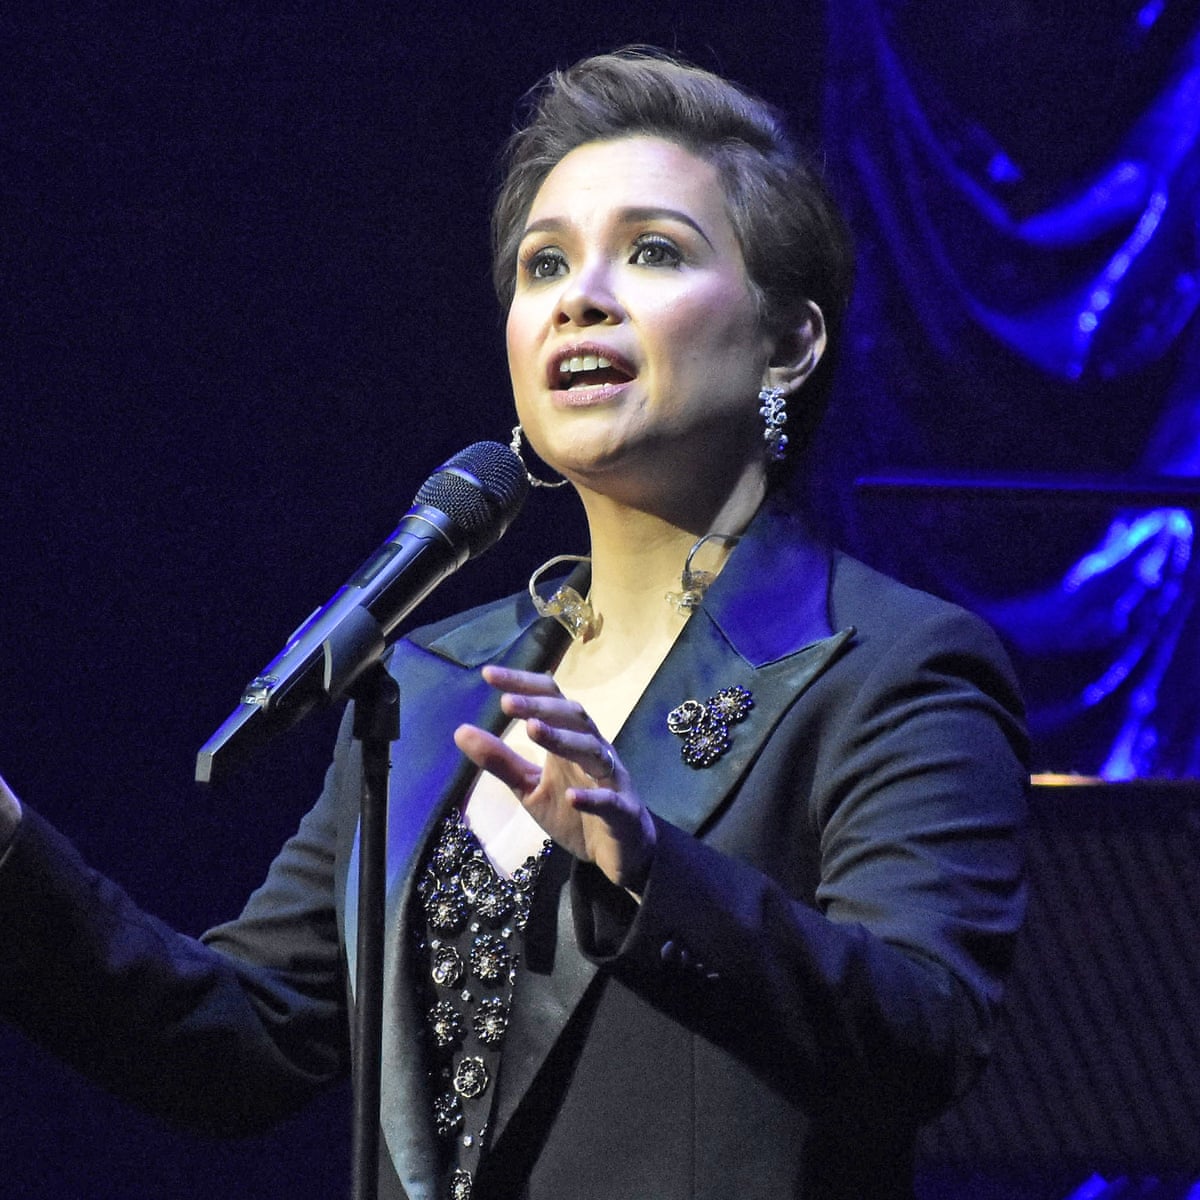 Lea Salonga review – musicals star evokes whole new world of stories |  Music | The Guardian